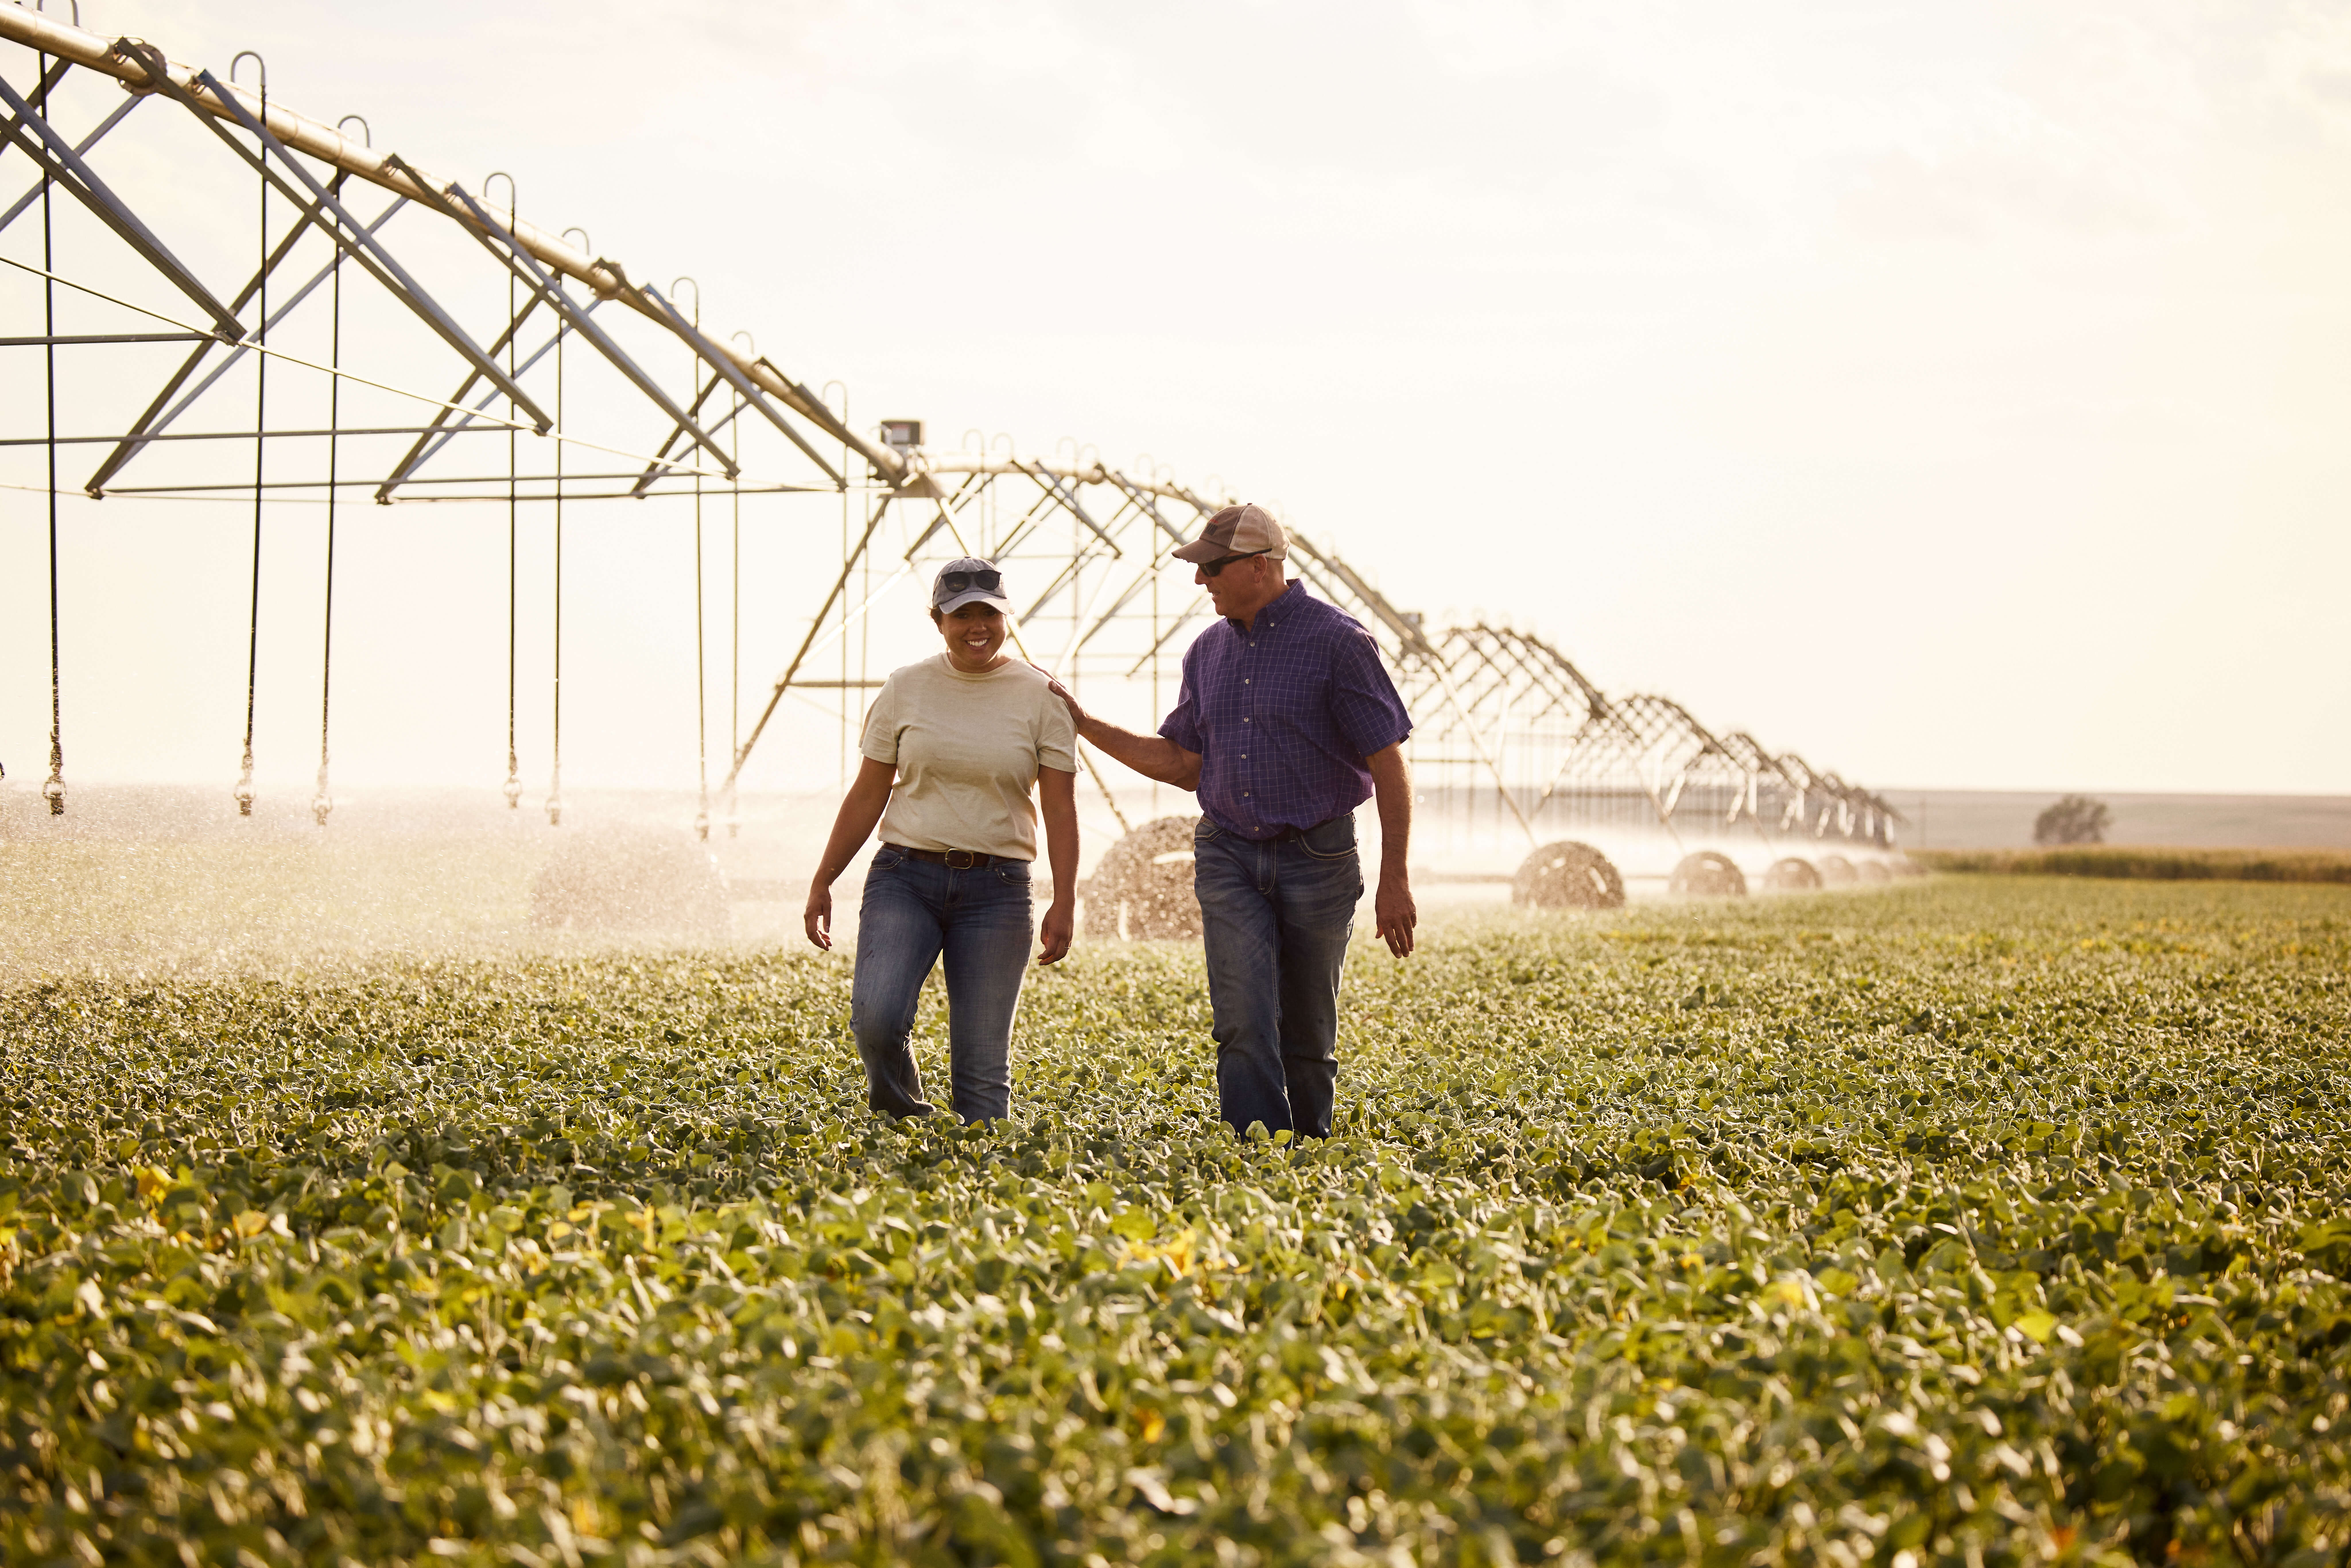 New data on food awareness: 59% of Americans unaware that farmers make up less than 1% of the US labor force